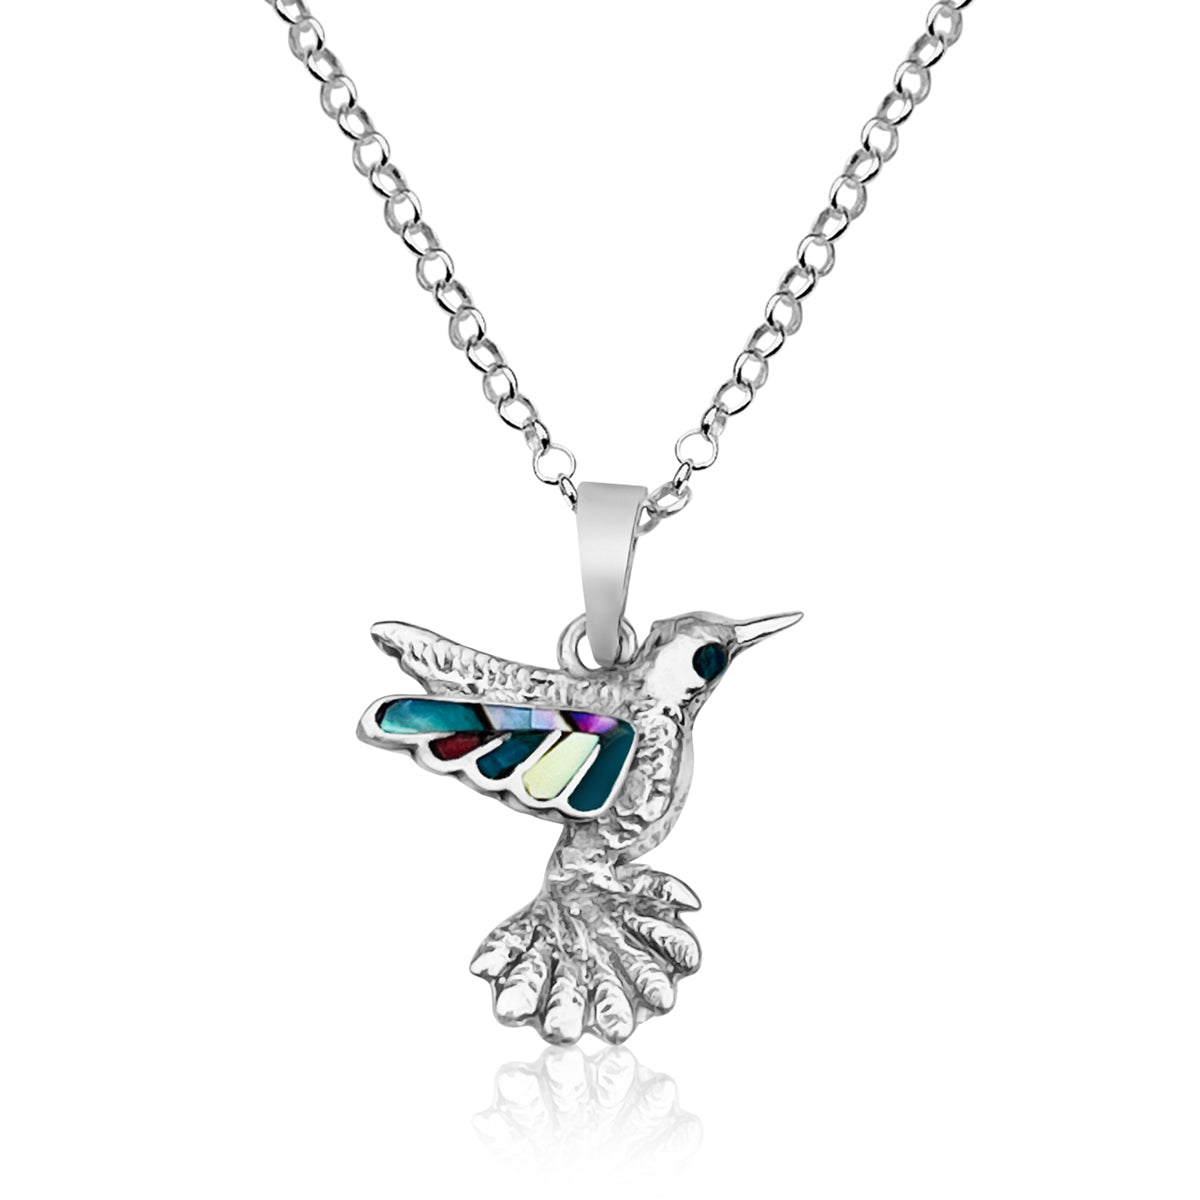 The Lightness of Being Sodalite Sterling Silver Necklace with a Hummingbird